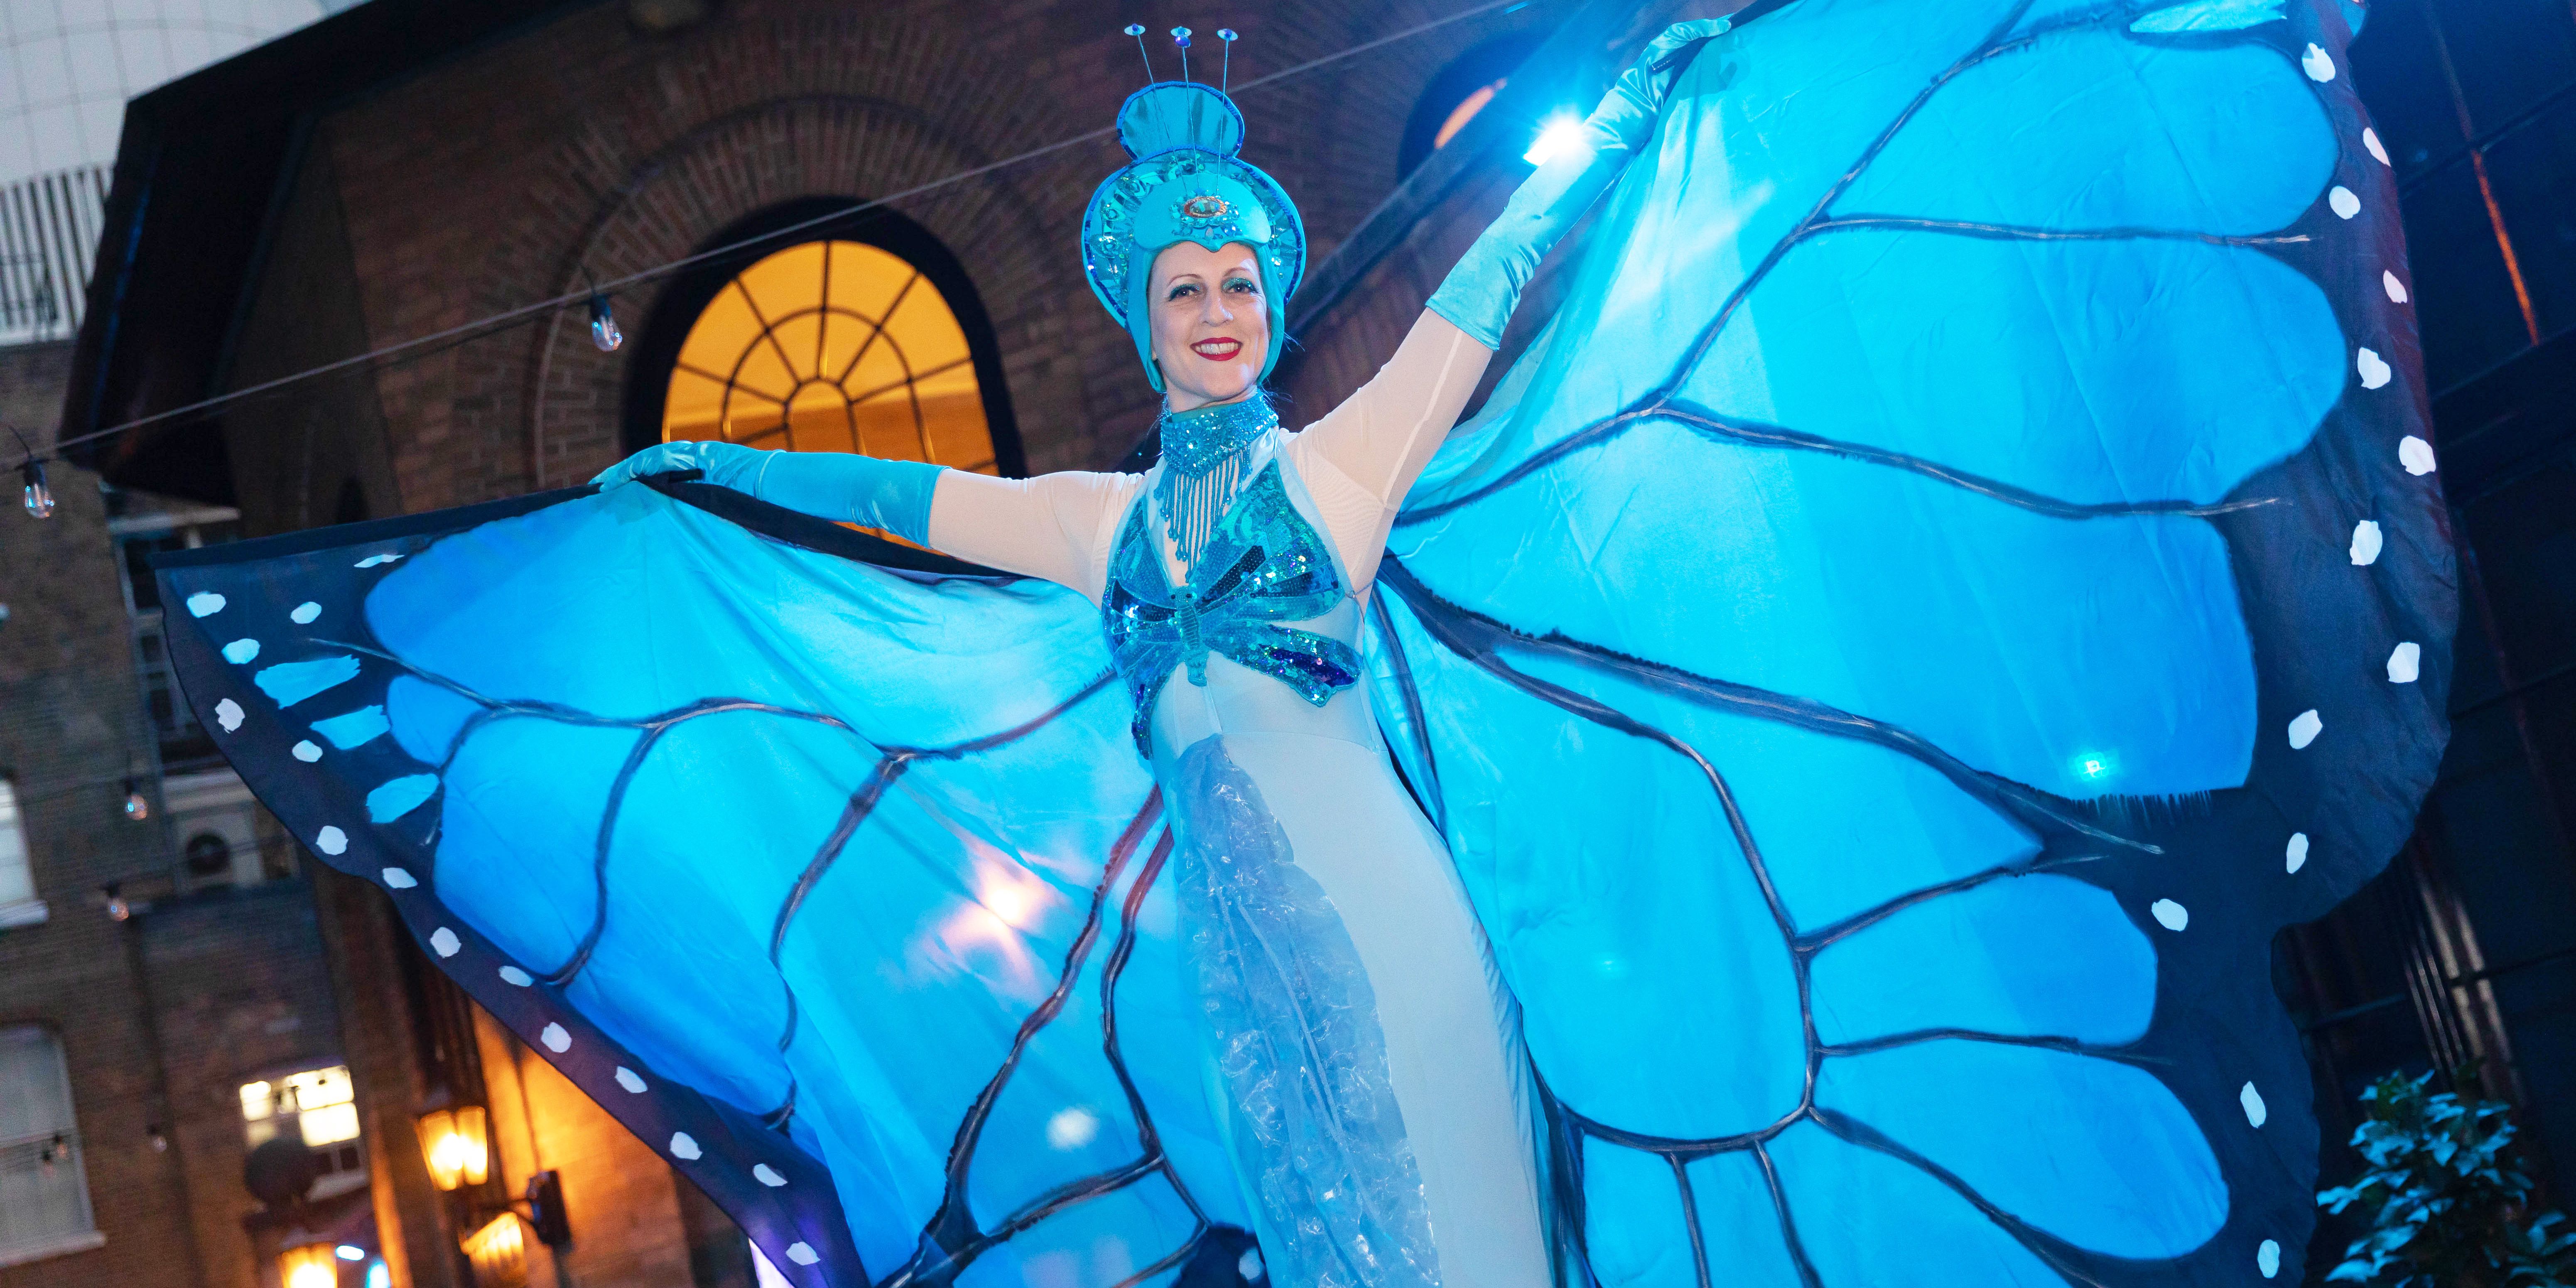 Butterfly Stilt Walkers Greet Arriving Guests at Magazine Awards Ceremony